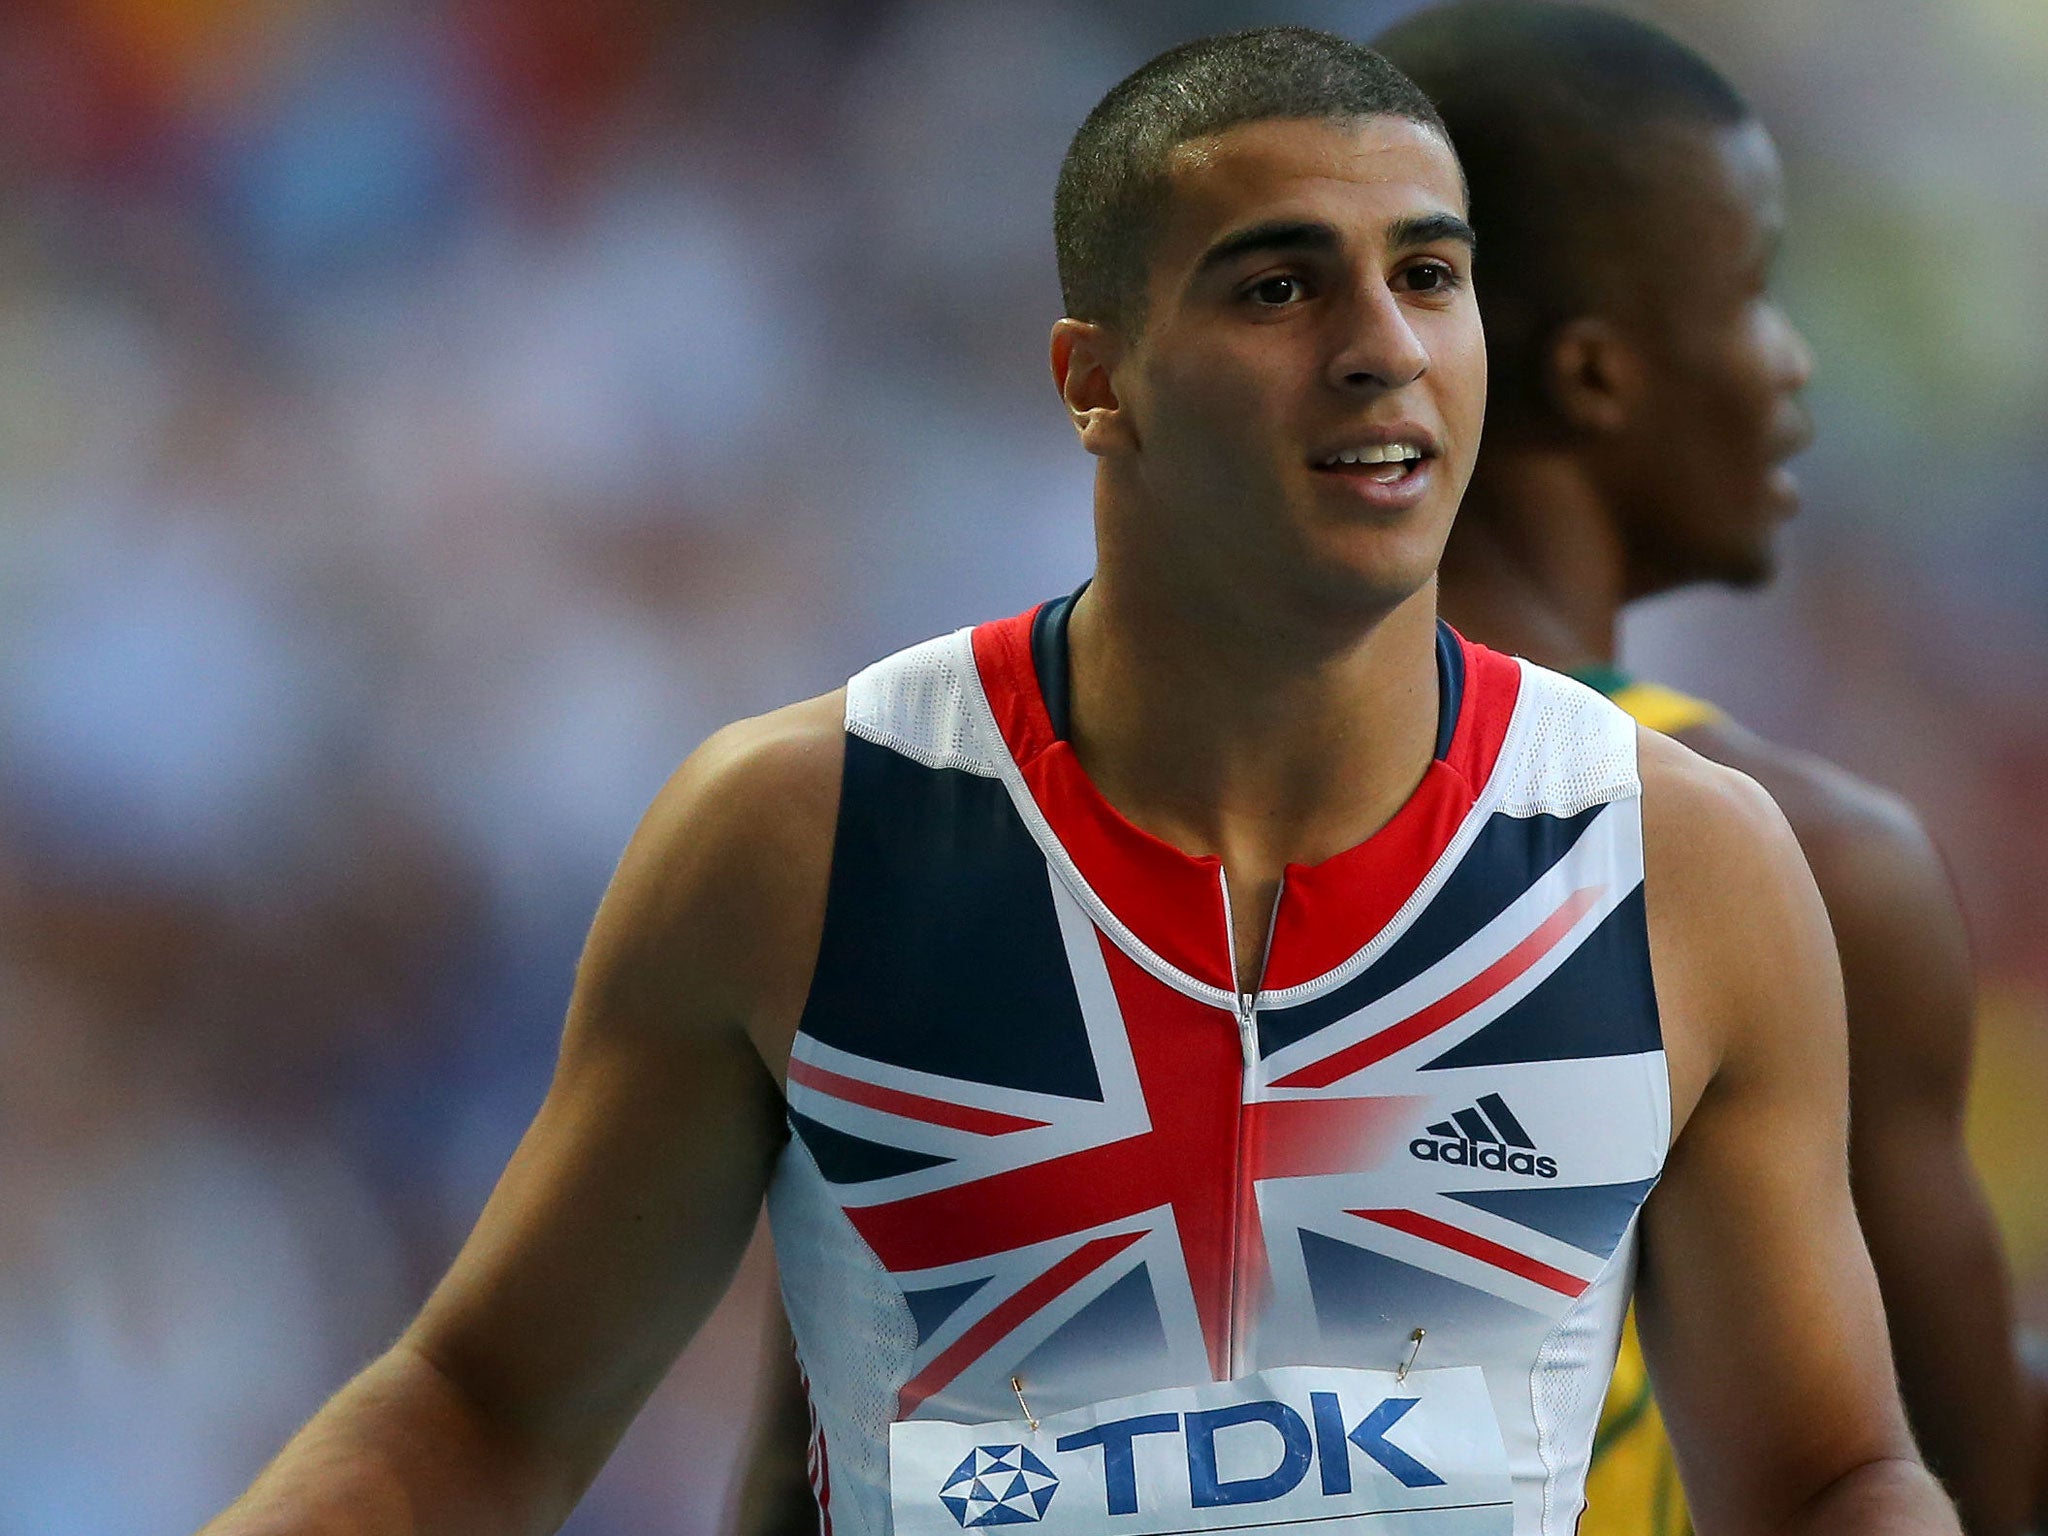 Great Britain's Adam Gemili after his 200metre final on seven of the 2013